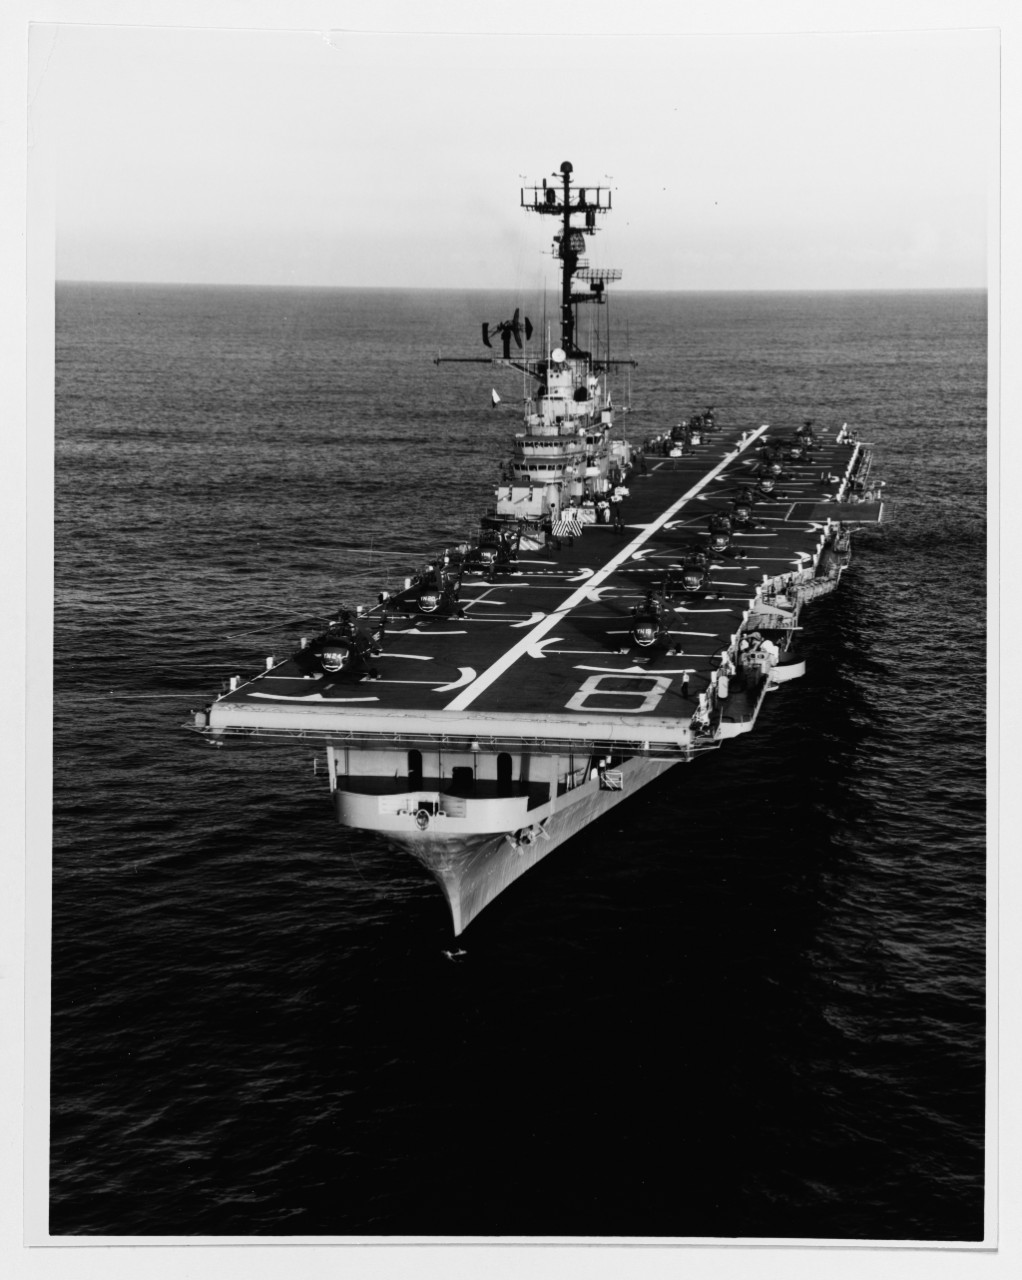 Photo #: USN 1104168  USS Valley Forge (LPH-8)